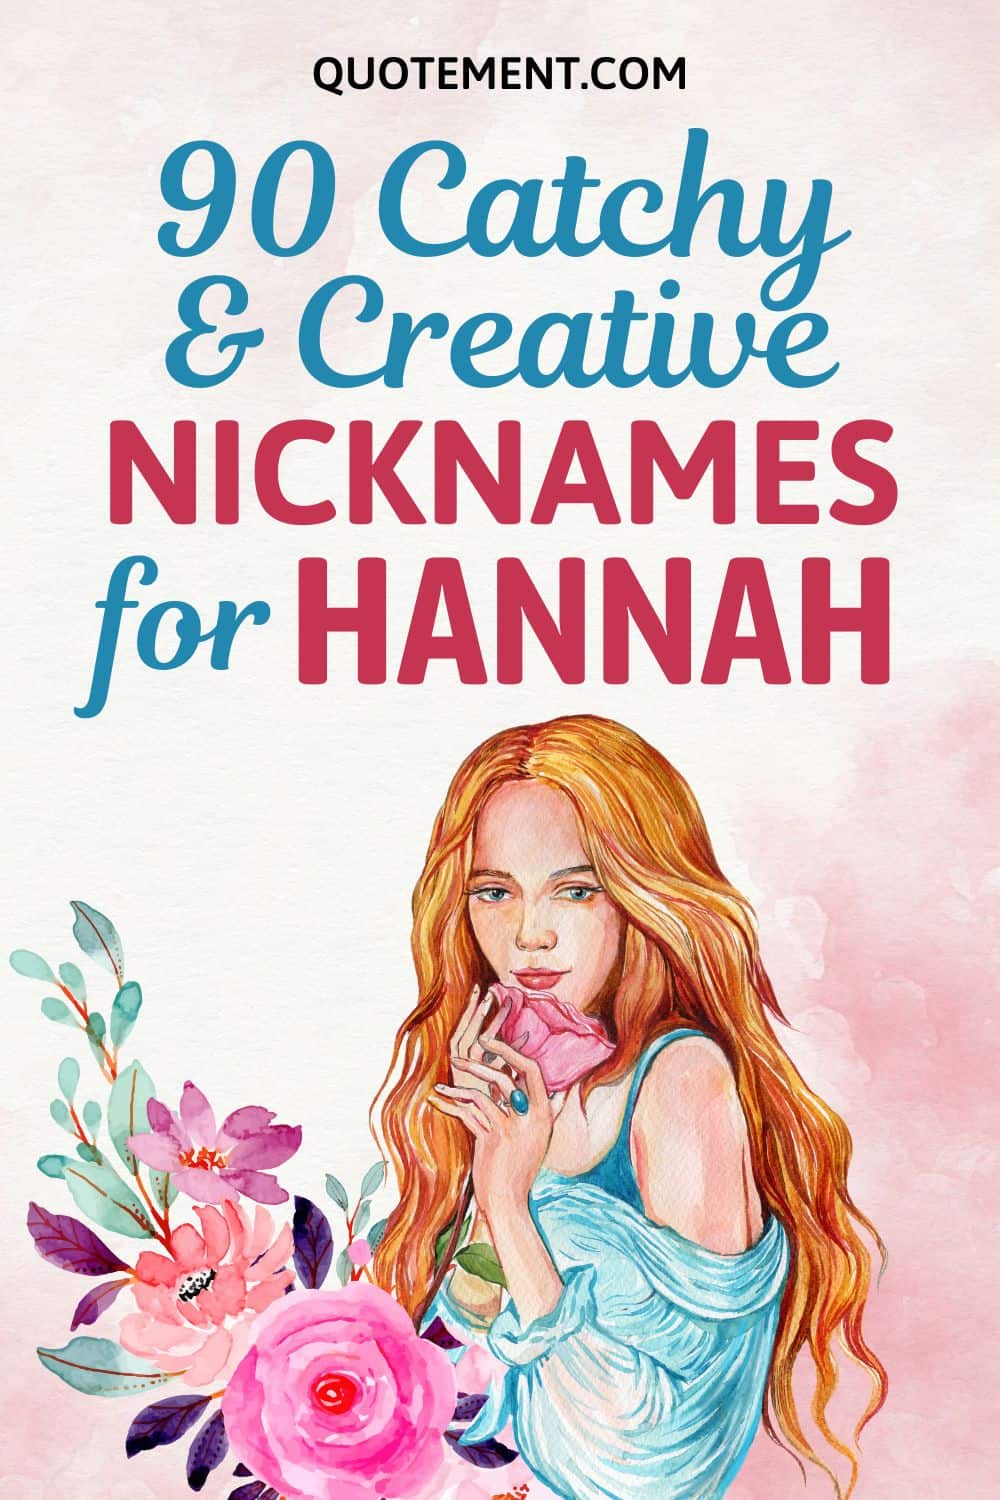 90 Adorable, Unique, And Creative Nicknames For Hannah
